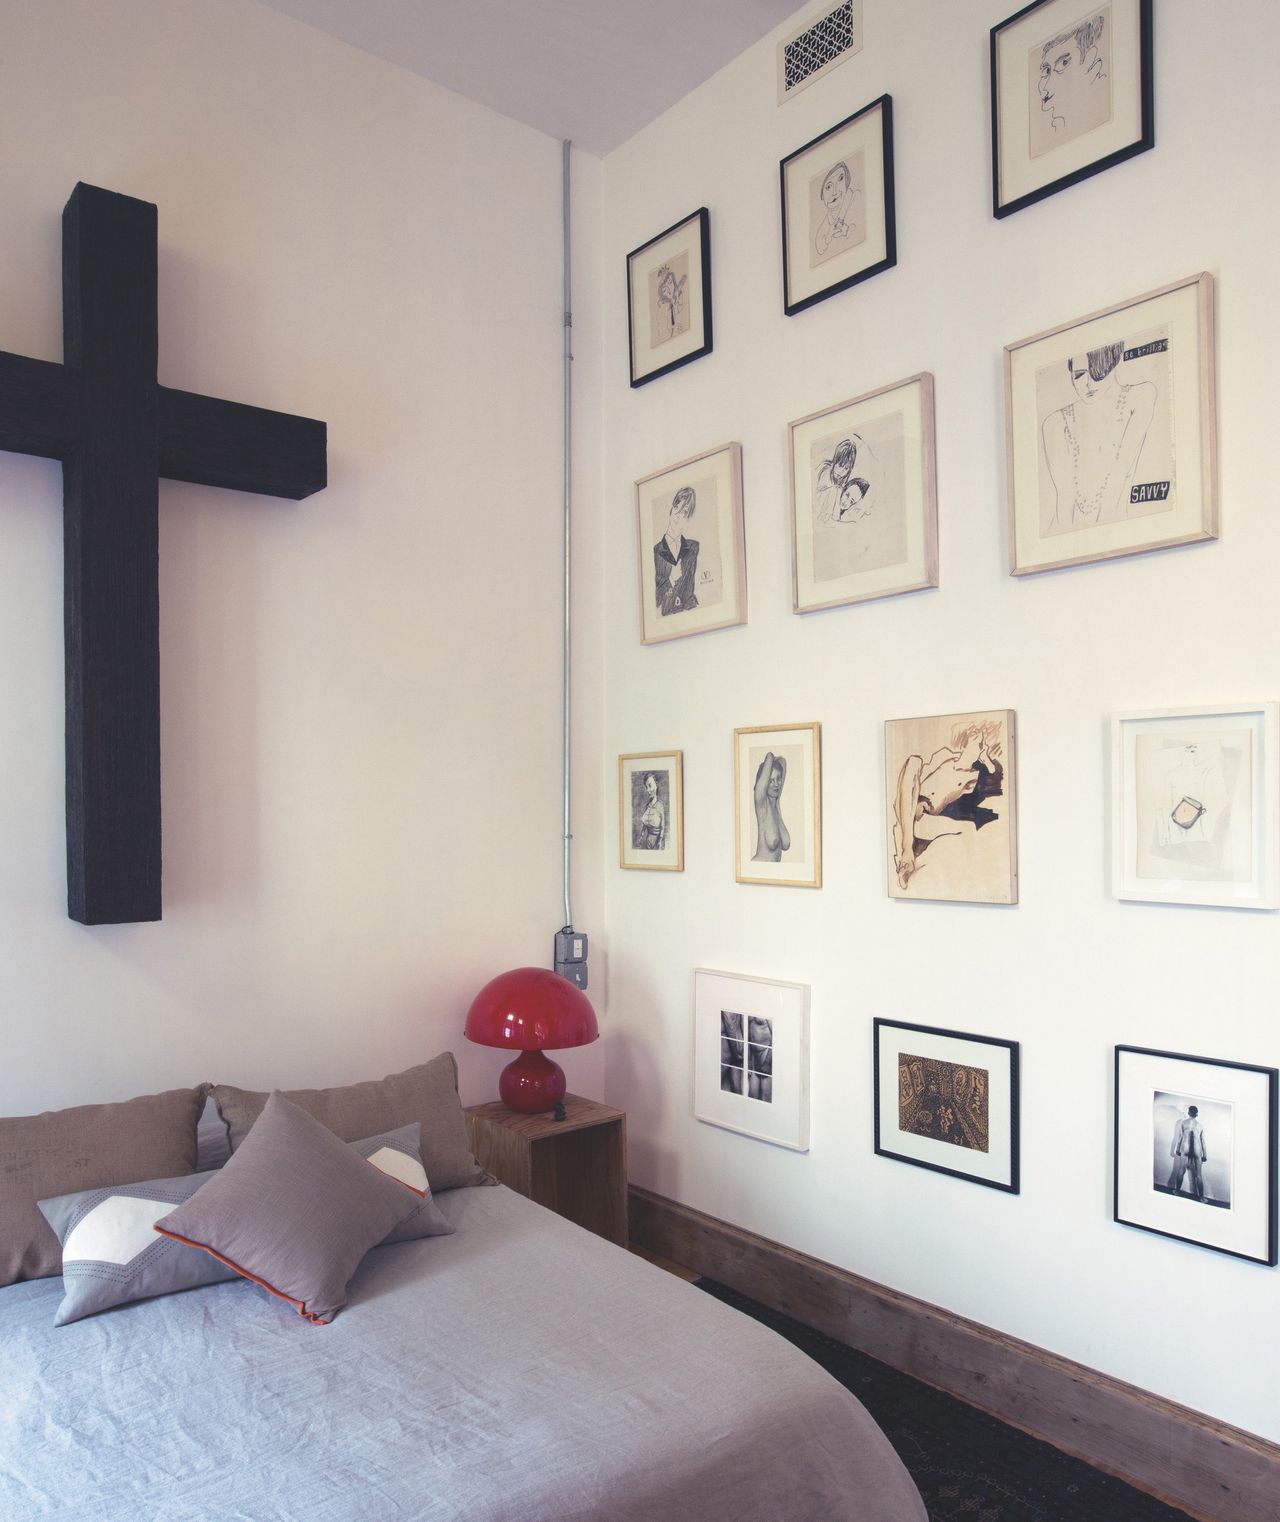 The home of Ugo Rondinone: A 2006 Valentin Carron cross, which Rondinone calls "a bit of a mock," hangs above his bed, while a montage of nudes, including work by John Currin, Karen Kilimnik and Andy Warhol, fills the adjacent wall. "You see the masculine and the feminine here," explains Rondinone about his considered arrangement.